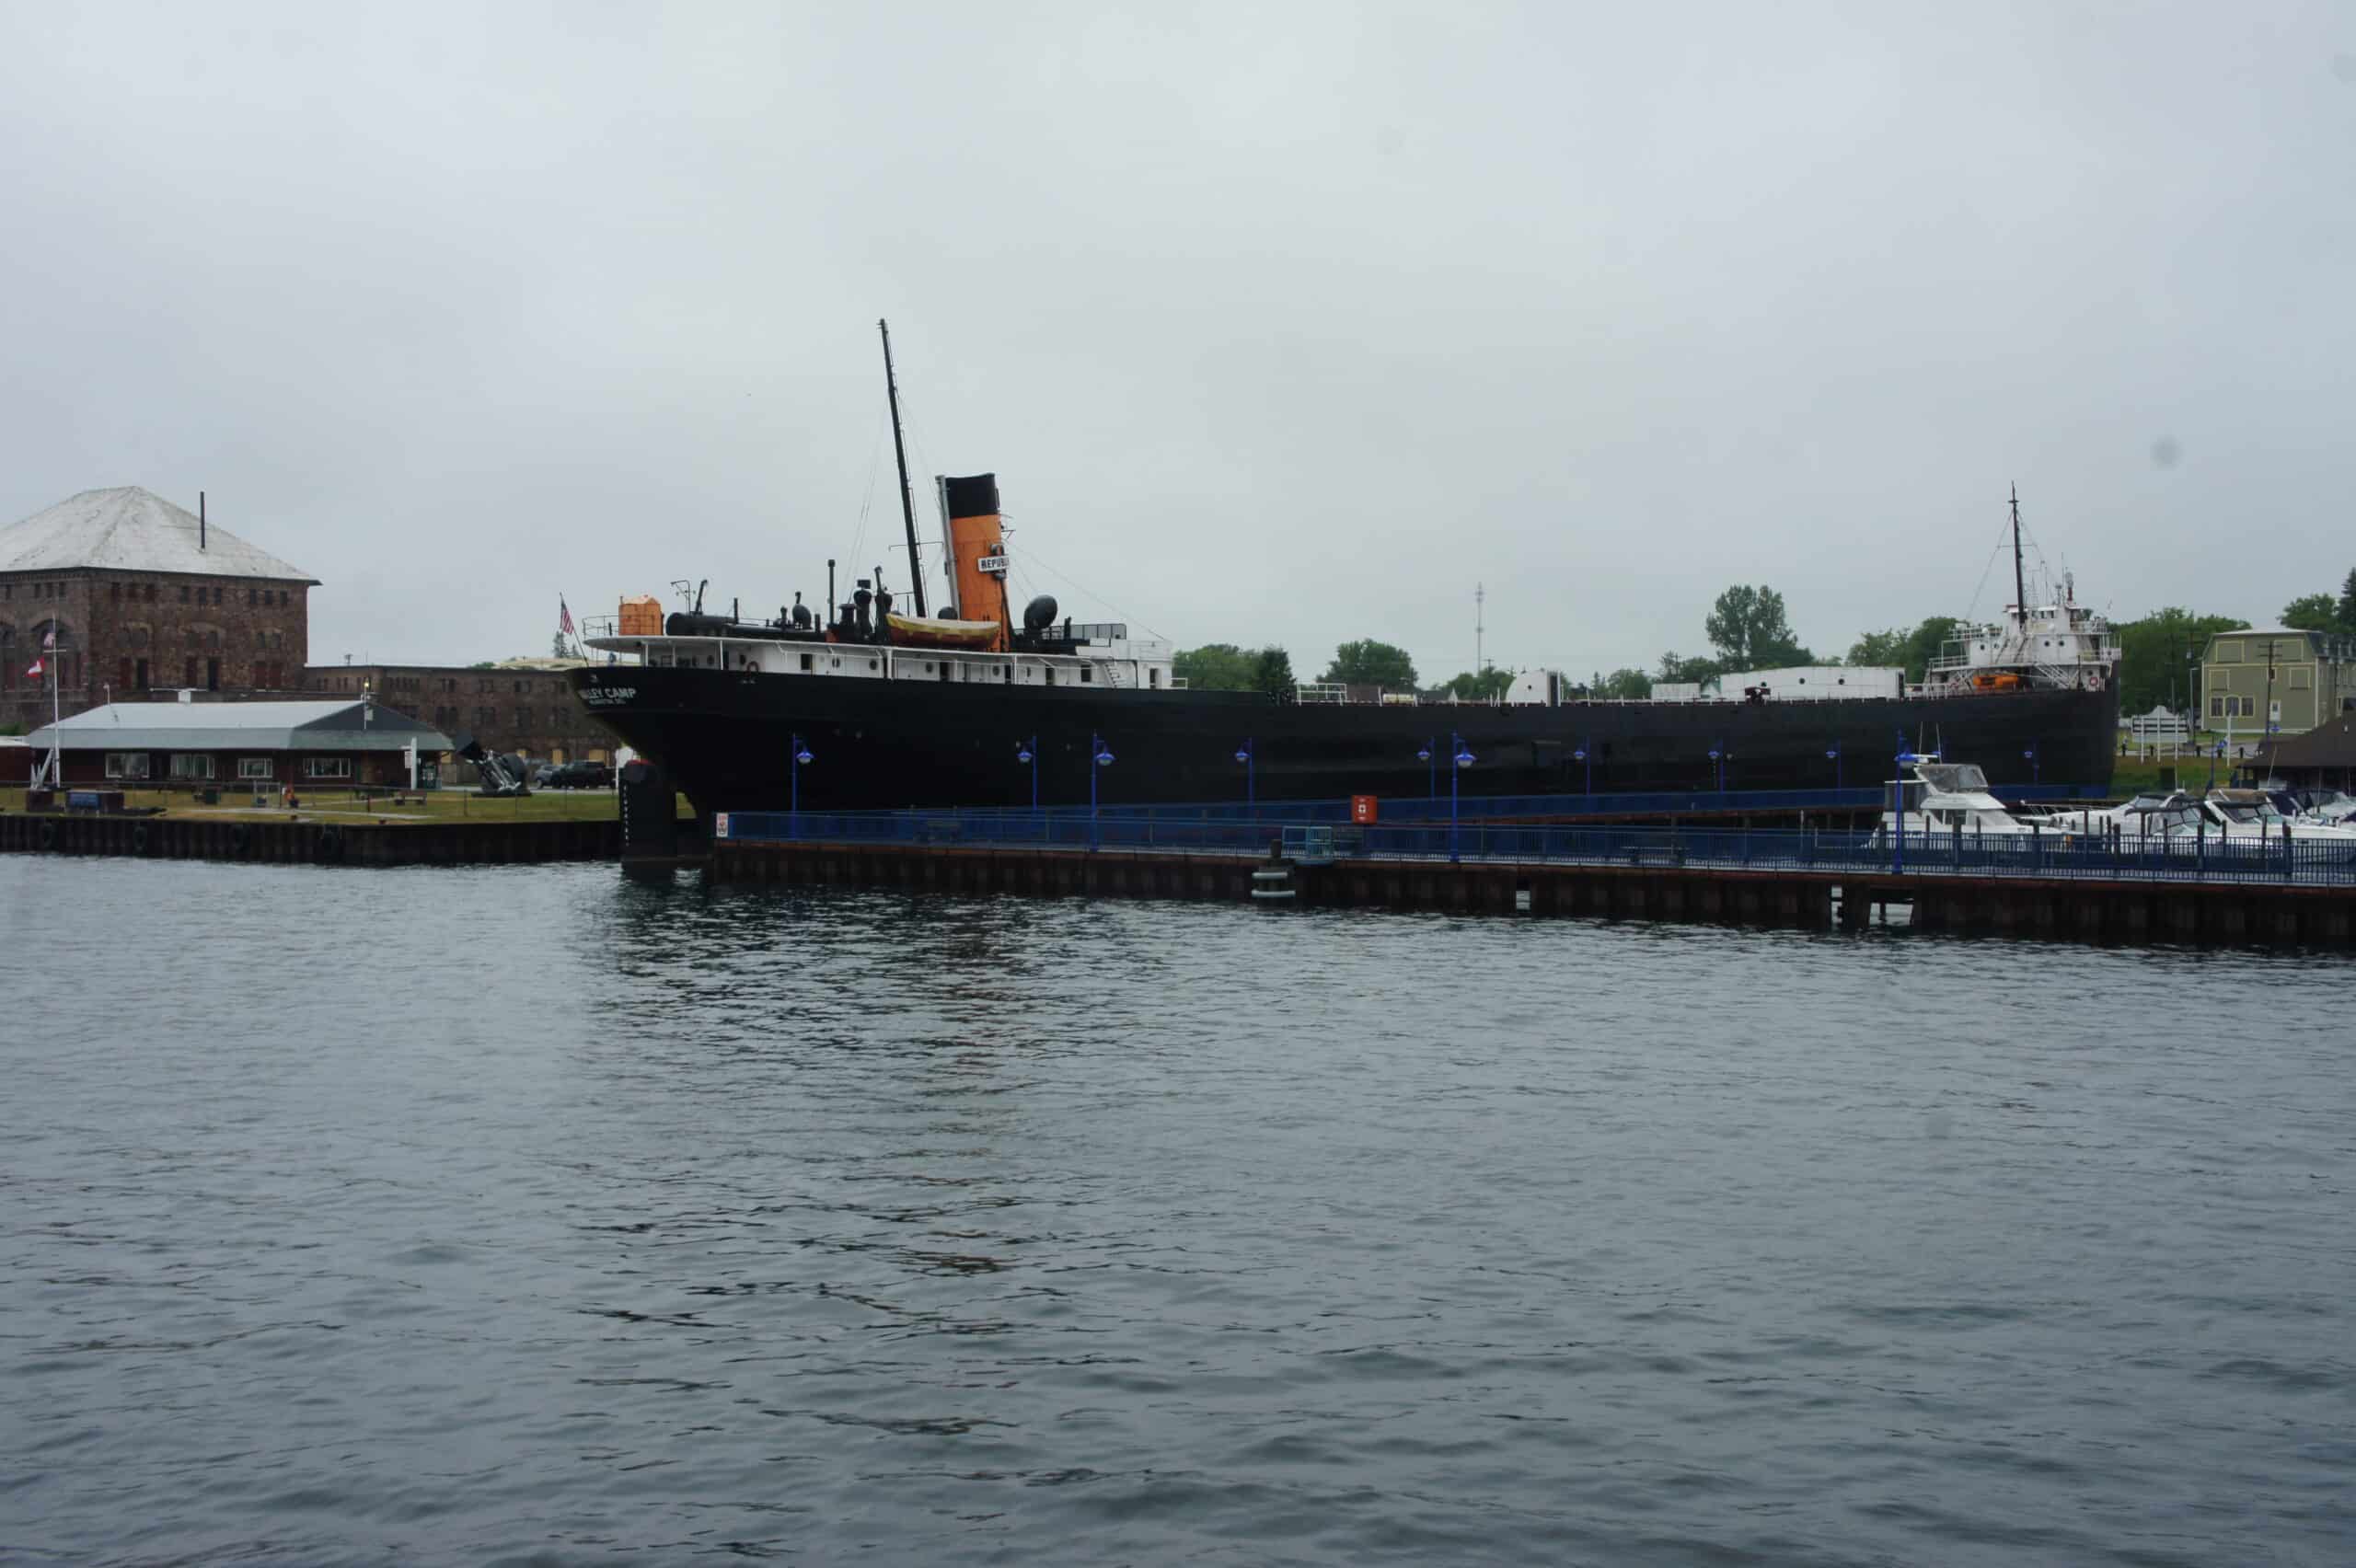 Soo Locks Boat Tour - The Valley Camp